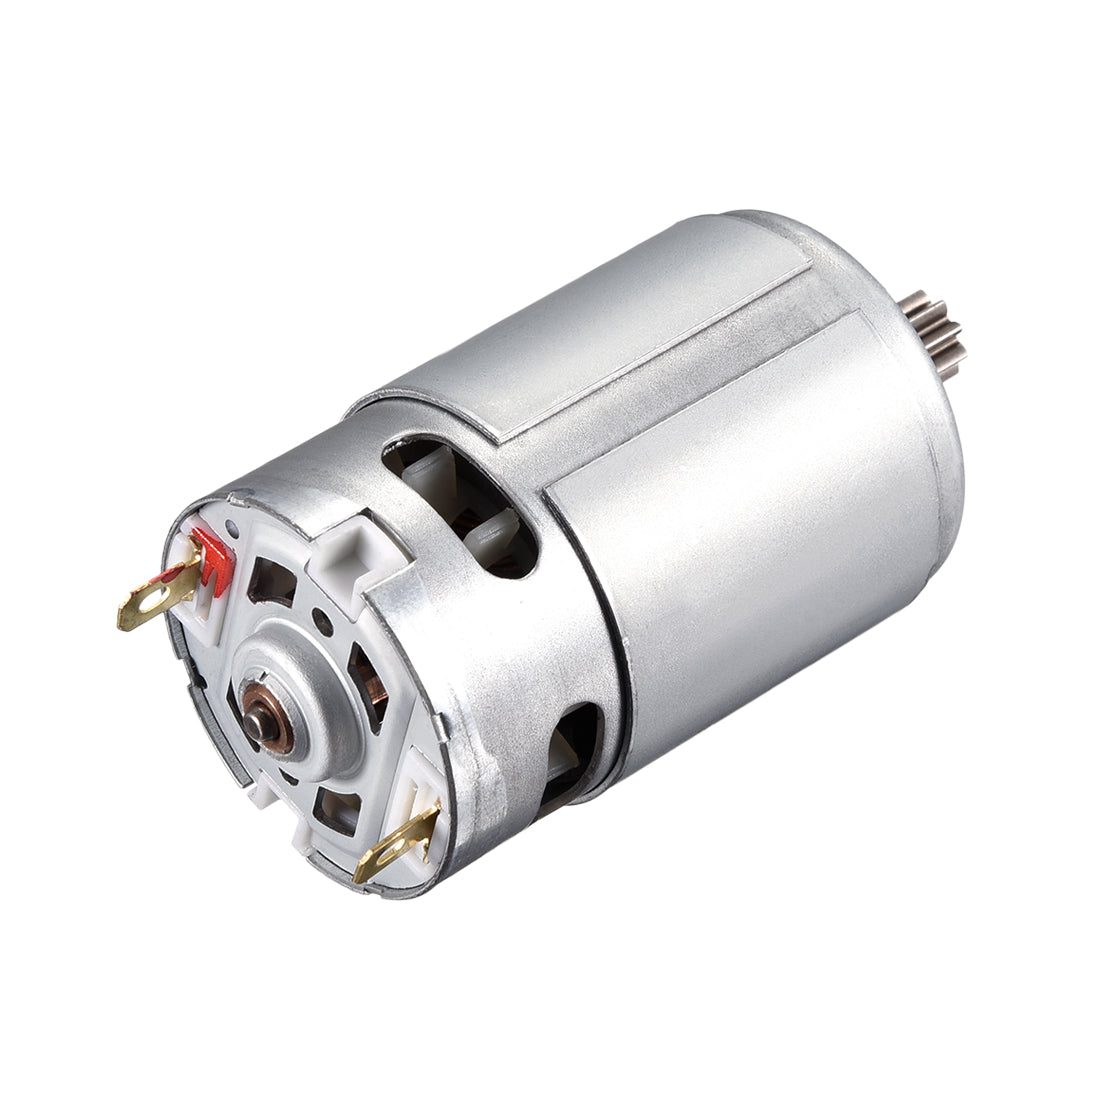 uxcell Uxcell DC 14.4V 19500RPM Electric Gear Motor 9 Teeth for Various Cordless Screwdriver